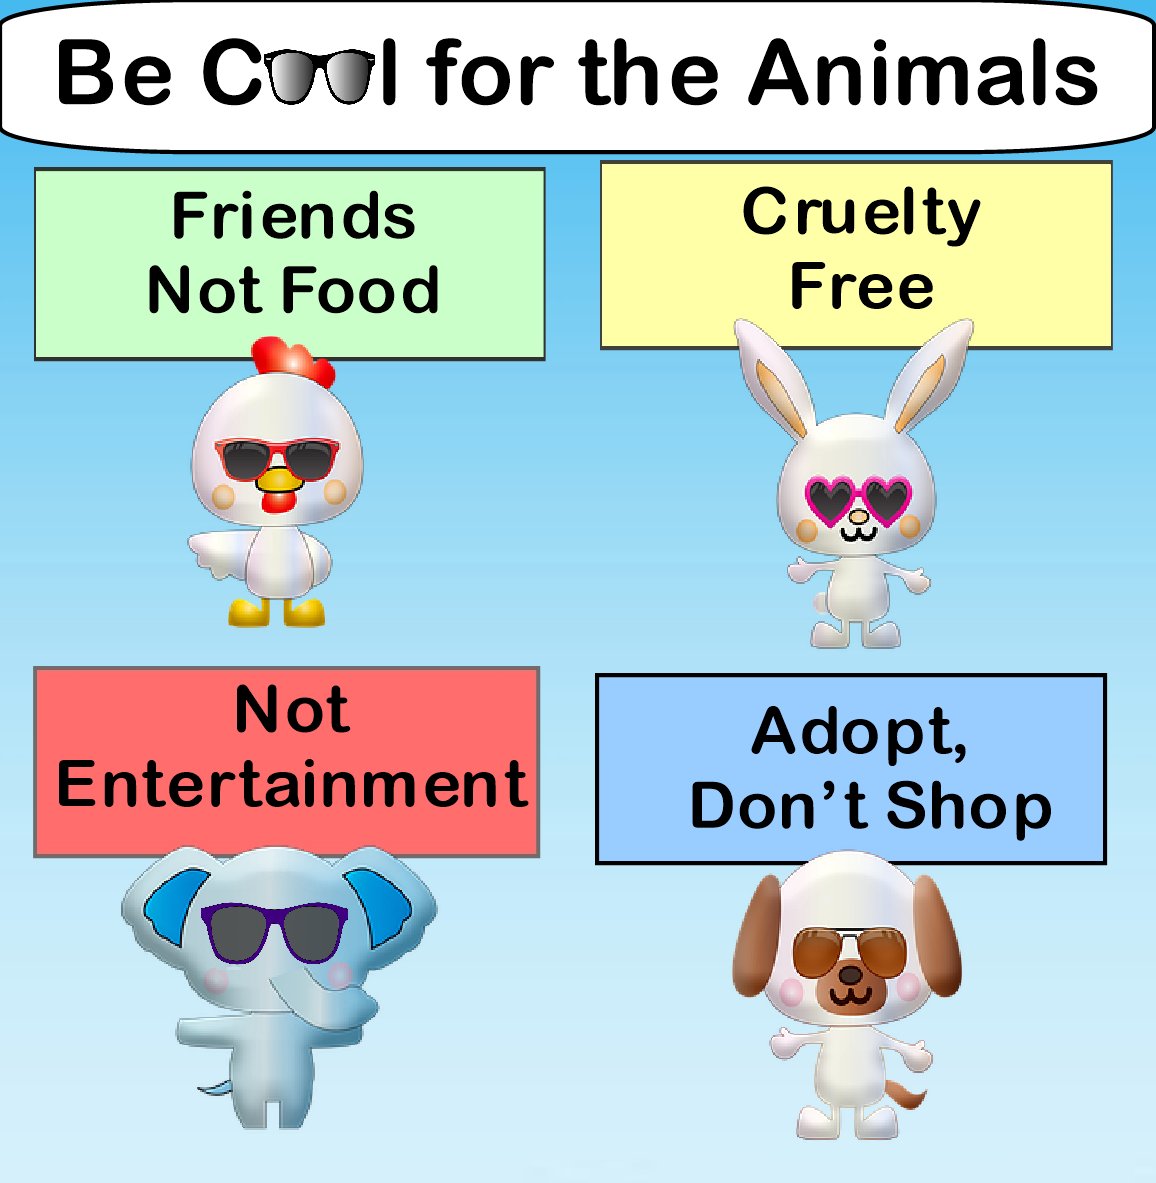 Make this the year to treat all animals with kindness. #becool #friendsnotfood #crueltyfree #notentertainment #adoptdontshop #goodcauses #changetheworld #cool #fortheanimals #bethechange